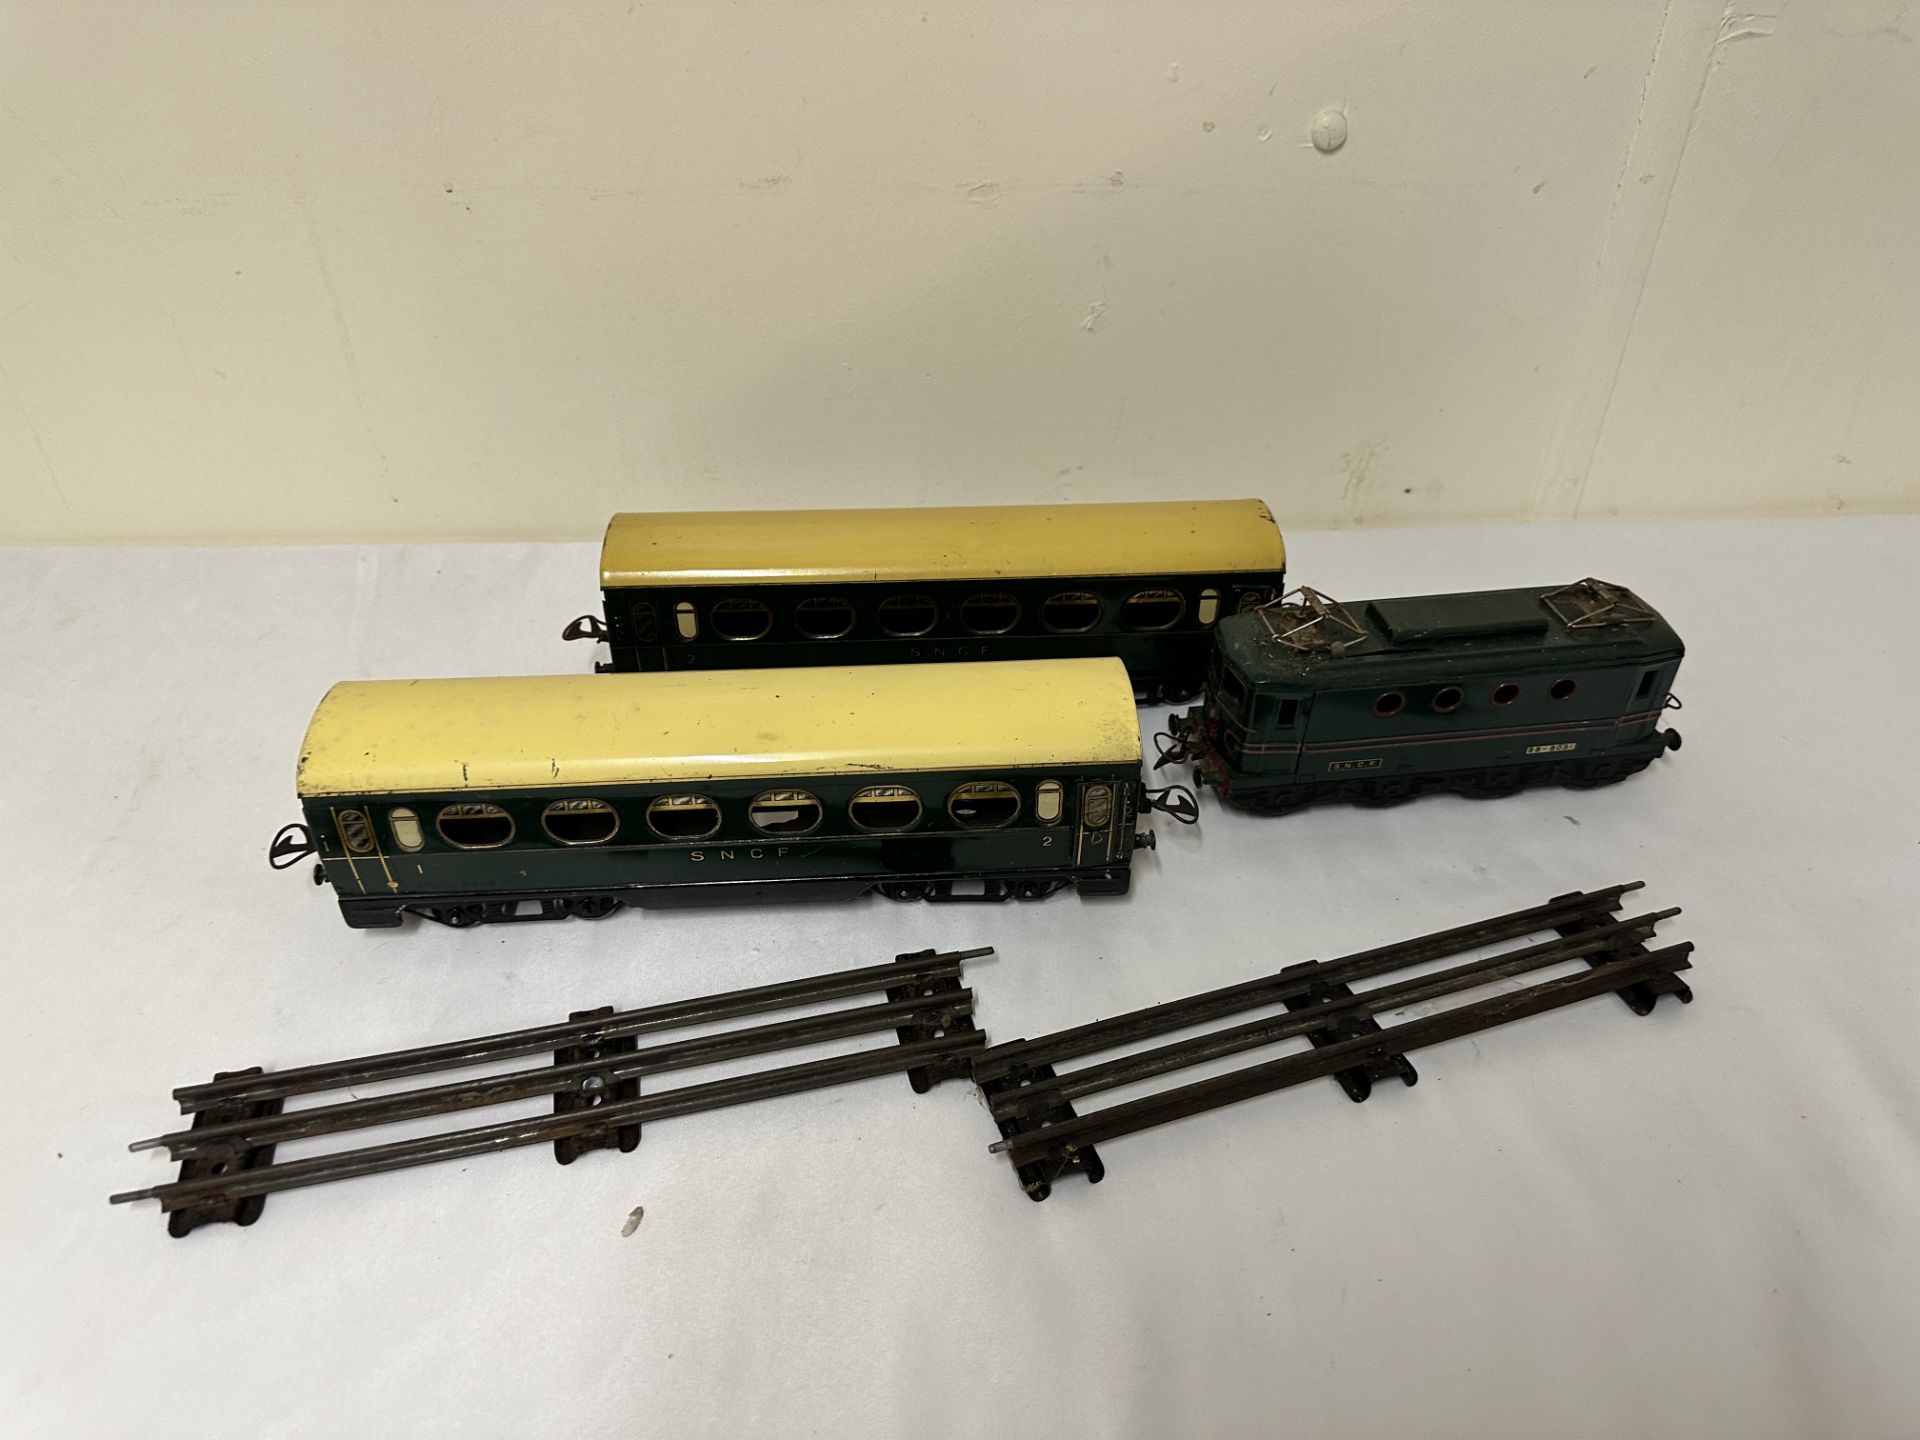 Hornby 0 gauge engine; together with two coaches